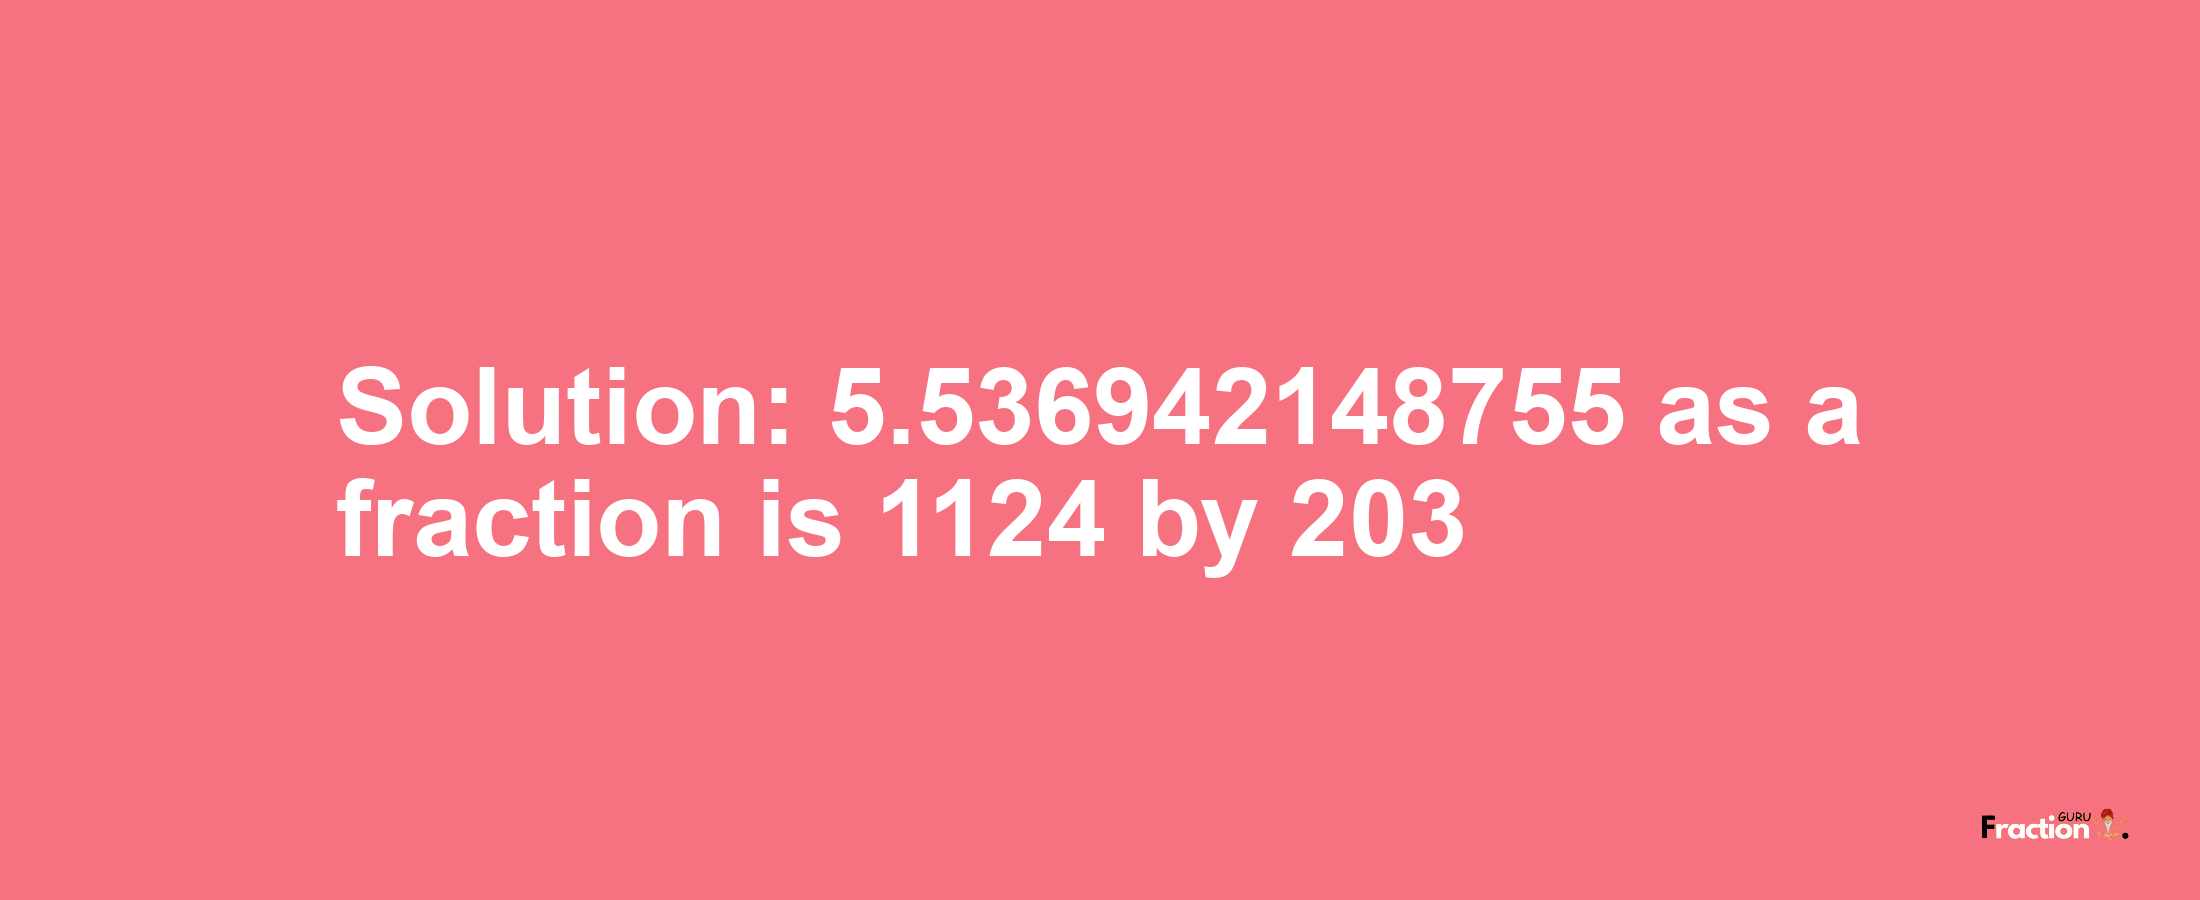 Solution:5.536942148755 as a fraction is 1124/203